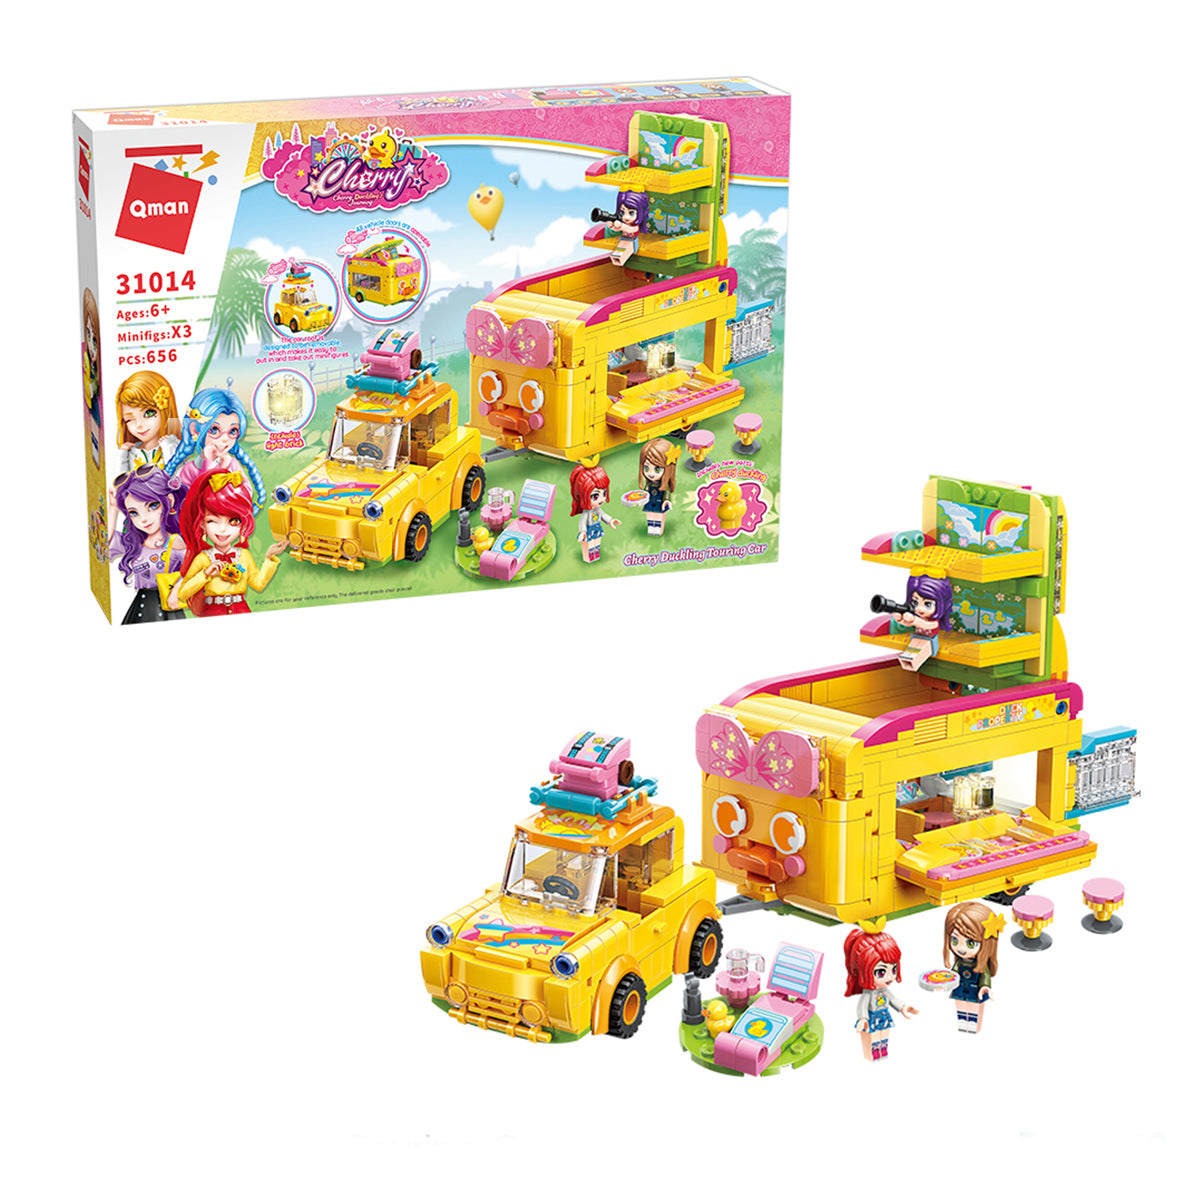 Qman Cherry Ducklings Journery: Cherry Duckling Touring Car (7681415512288)